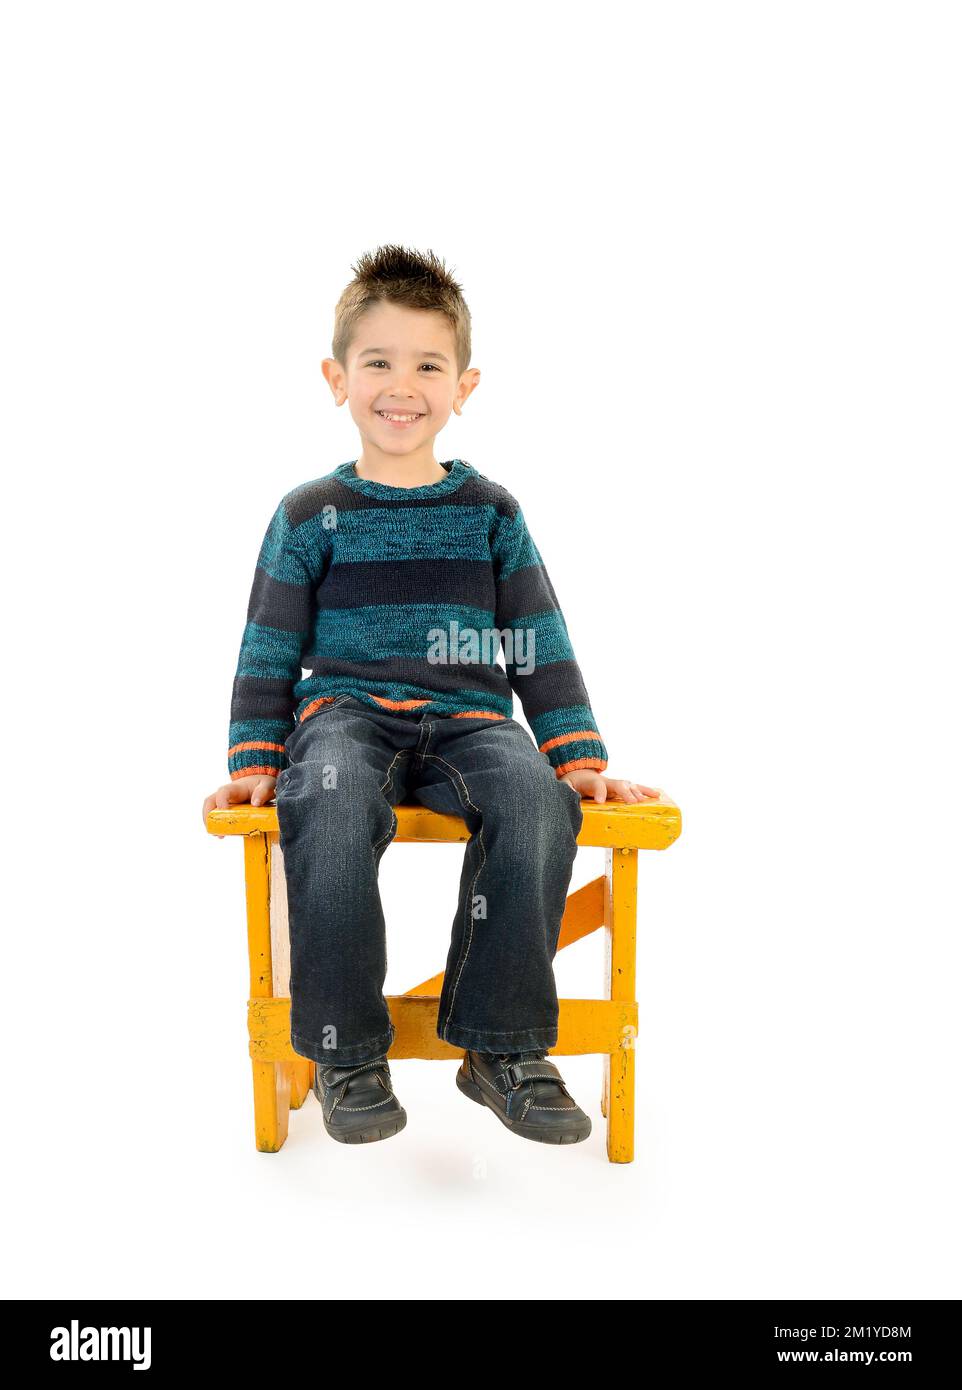 Isolated child smiling sitting on a yellow bench. Stock Photo